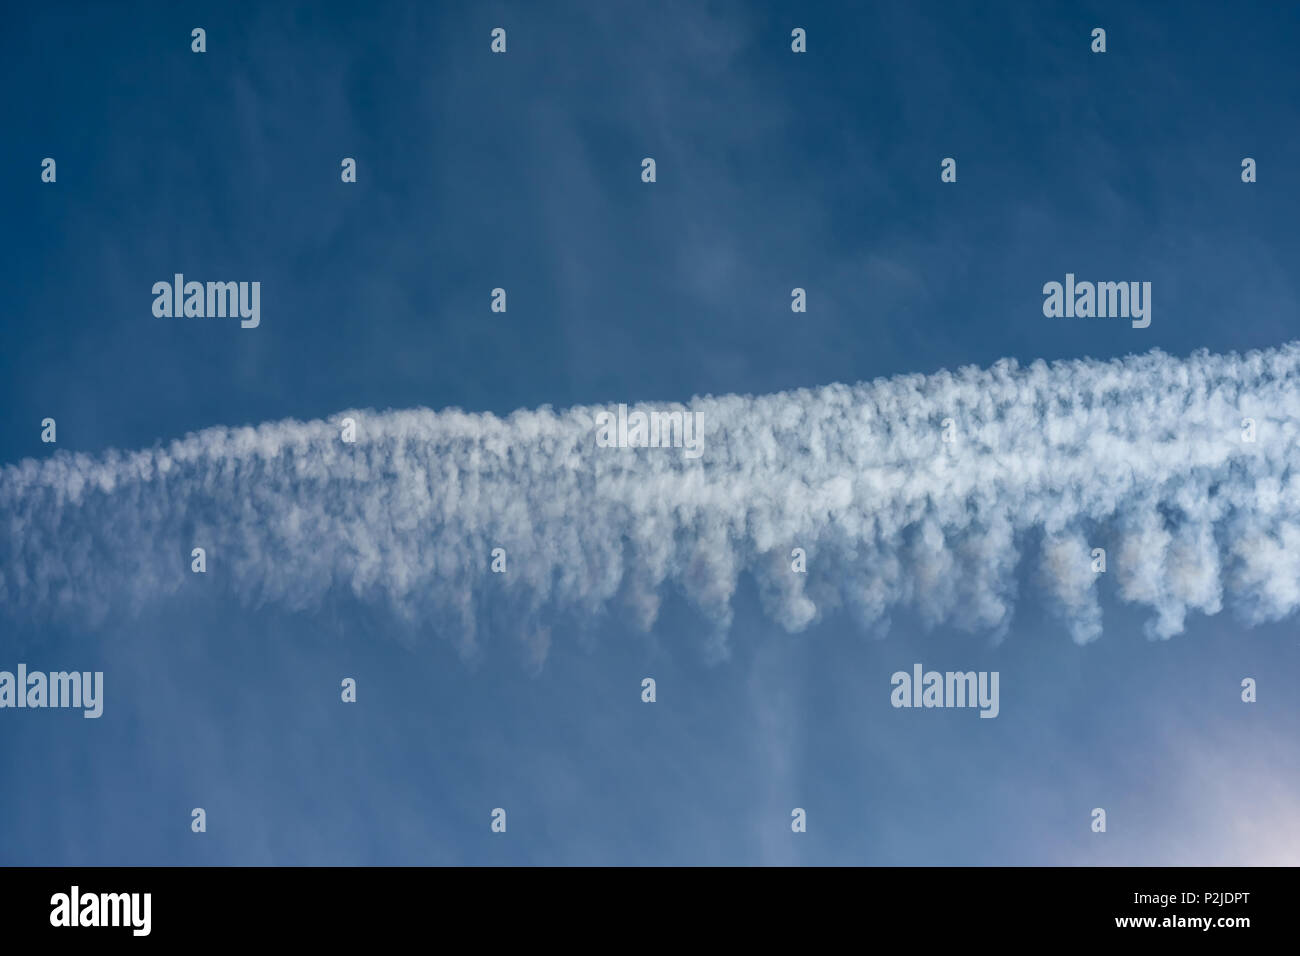 Environmental pollution by airplanes - chemtrails or contrails Stock Photo